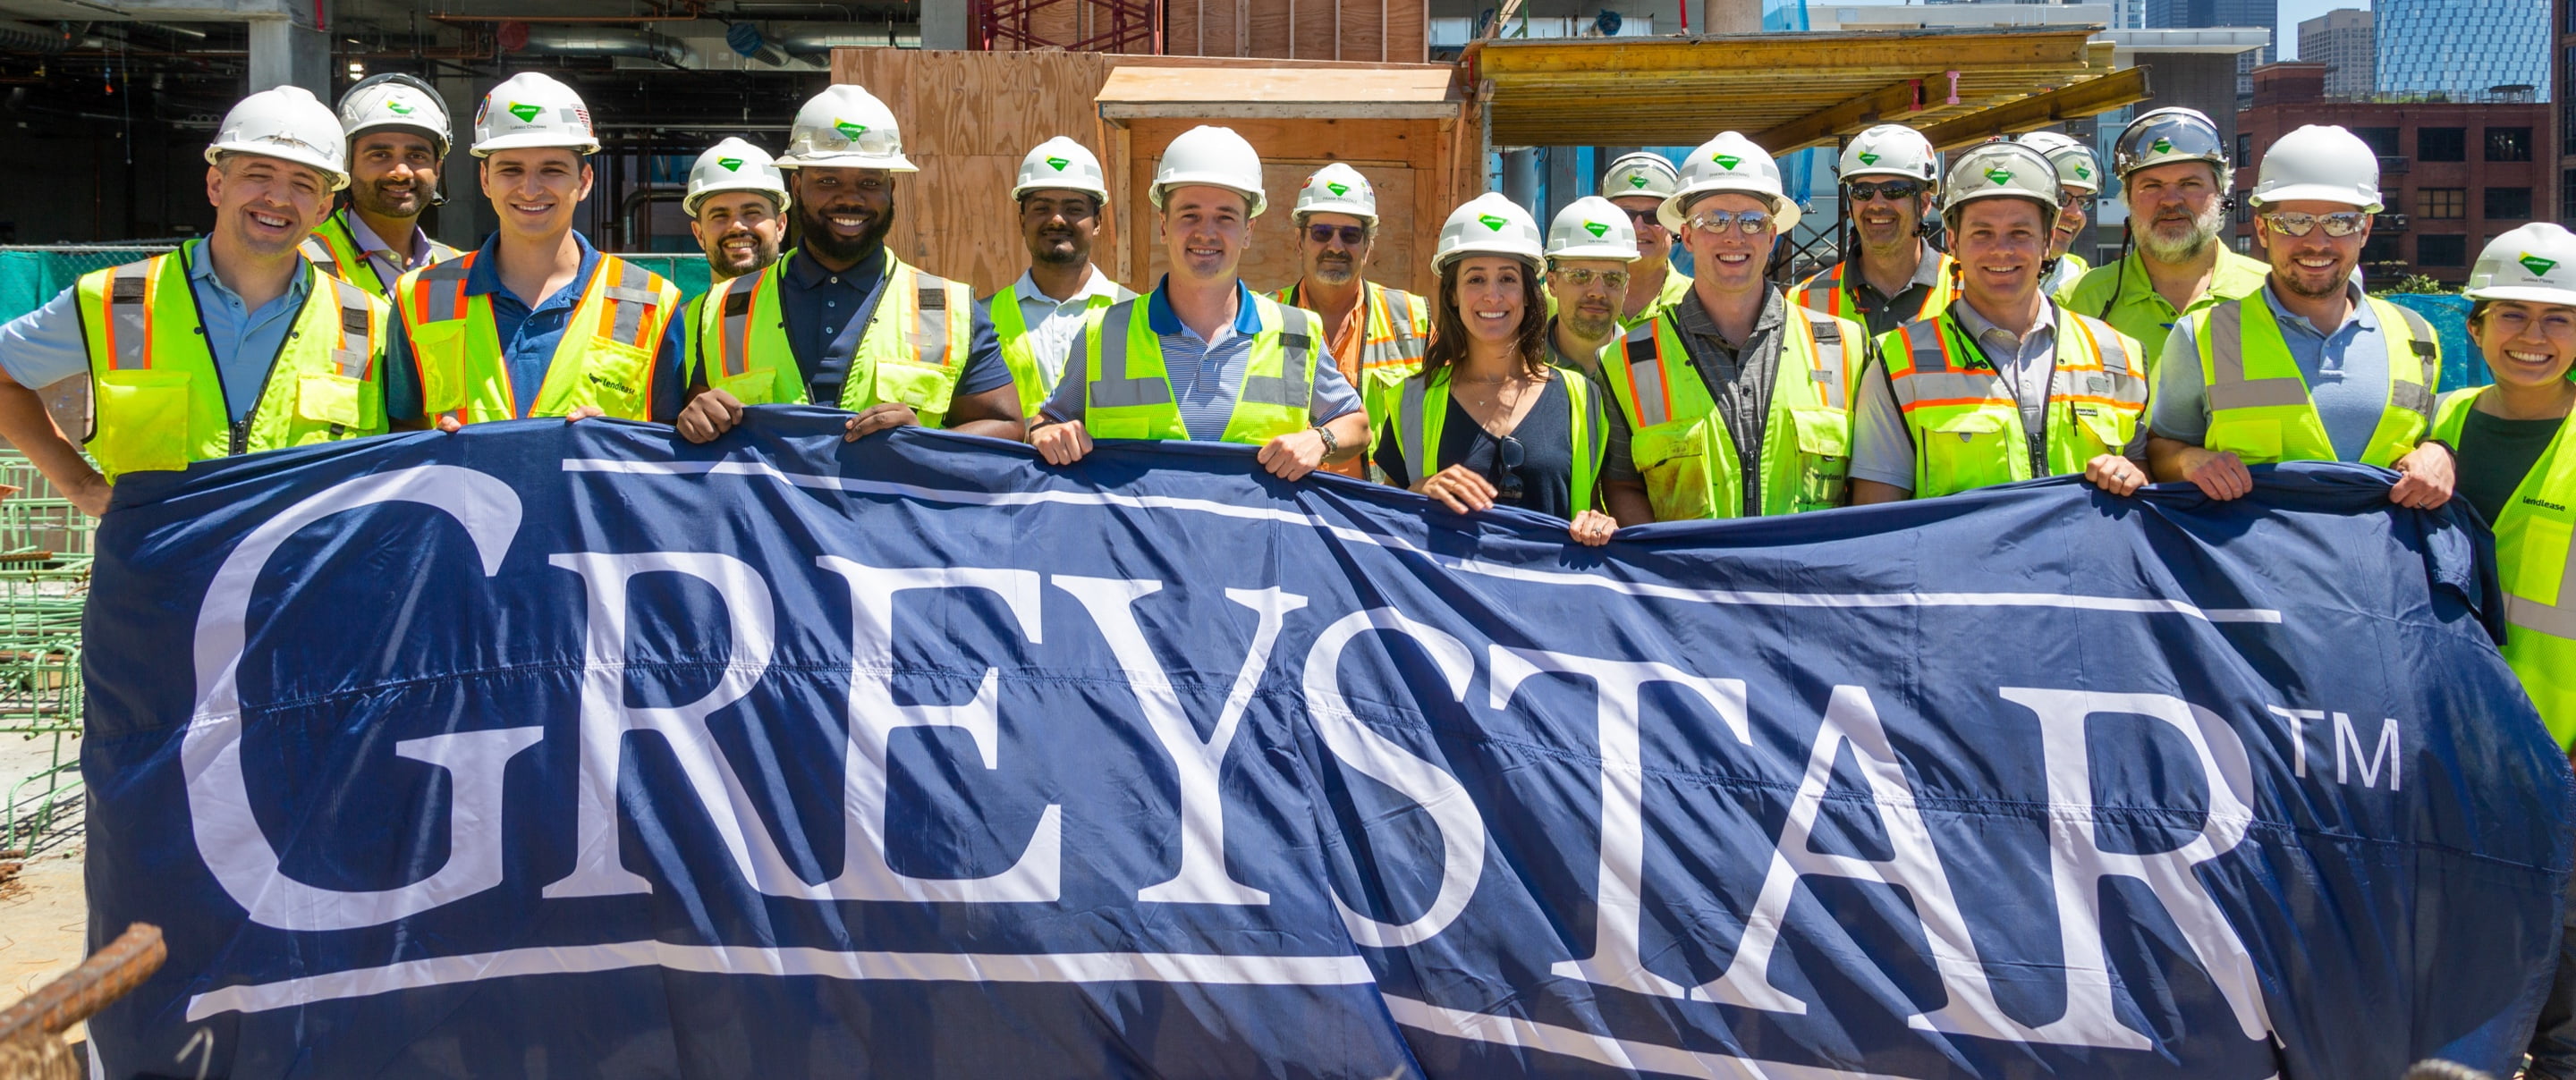 Group of construction workers holding a Greystar banner, smiling for a picture